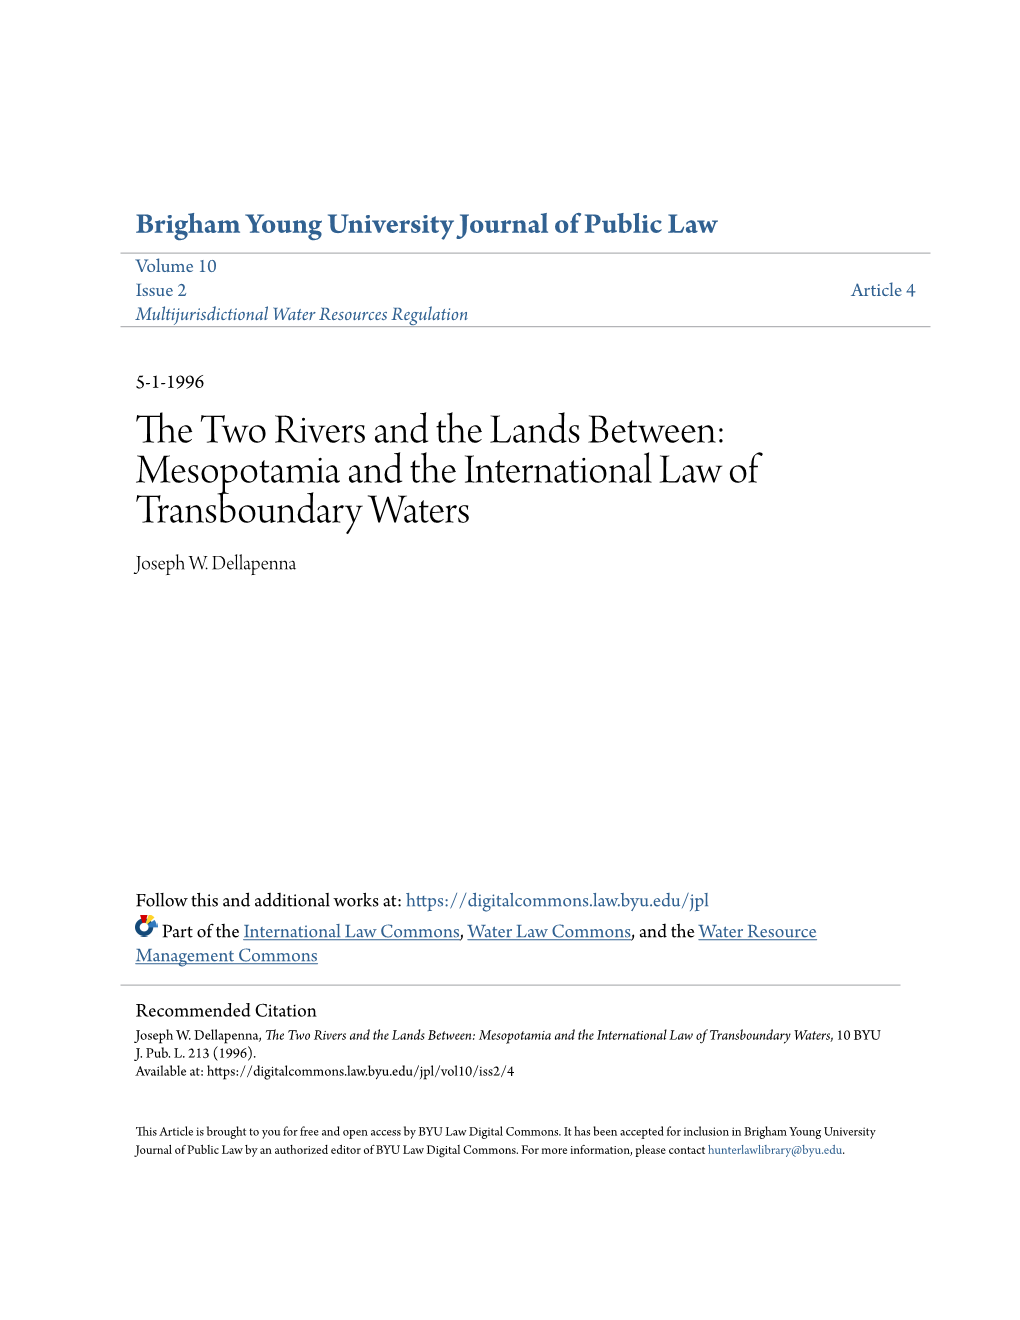 The Two Rivers and the Lands Between: Mesopotamia and the International Law of Transboundary Waters, 10 BYU J